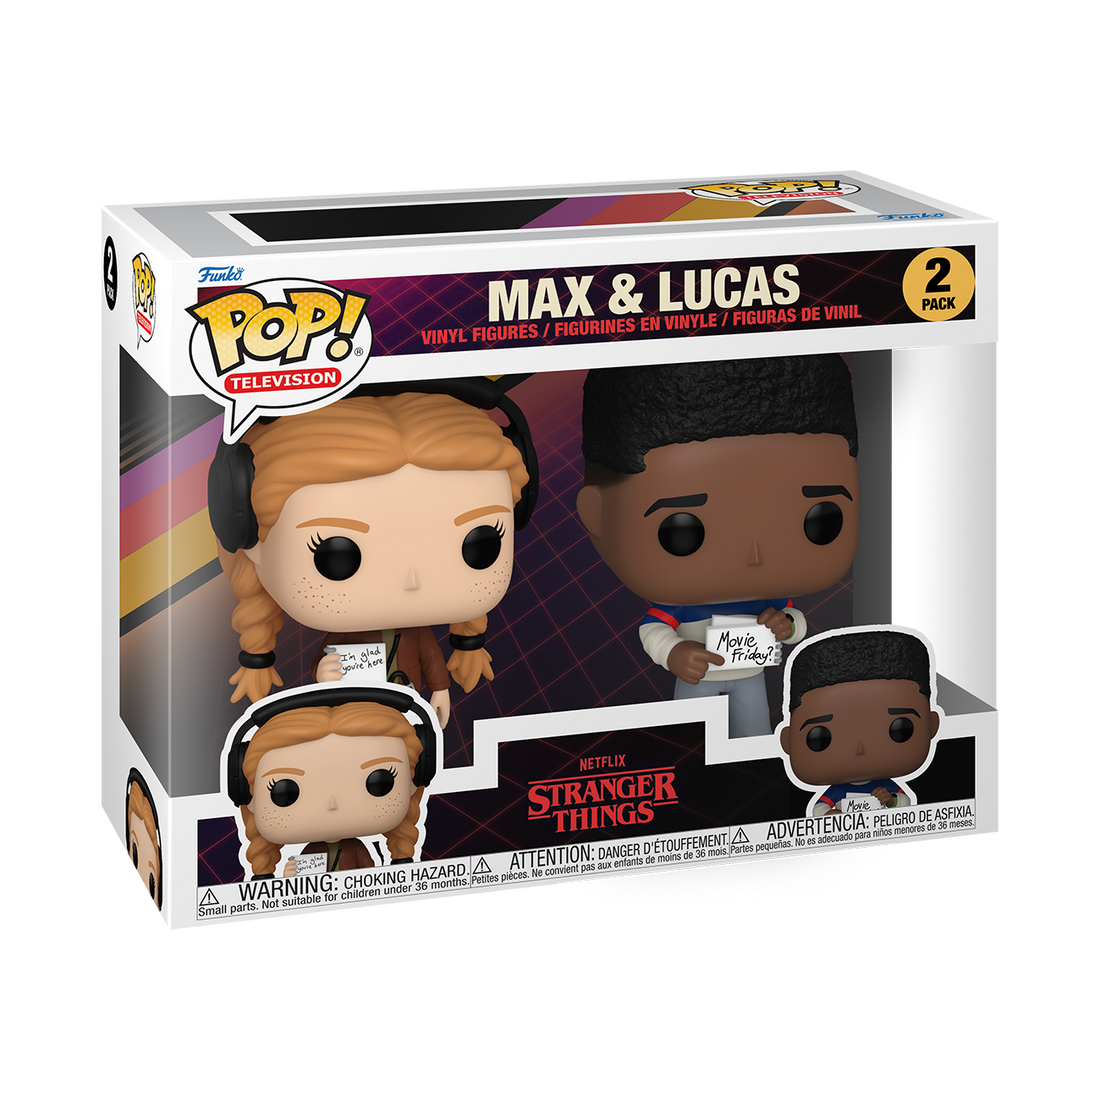 Funko Pop! Television Stranger Things Max & Lucas 2 Pack Funko